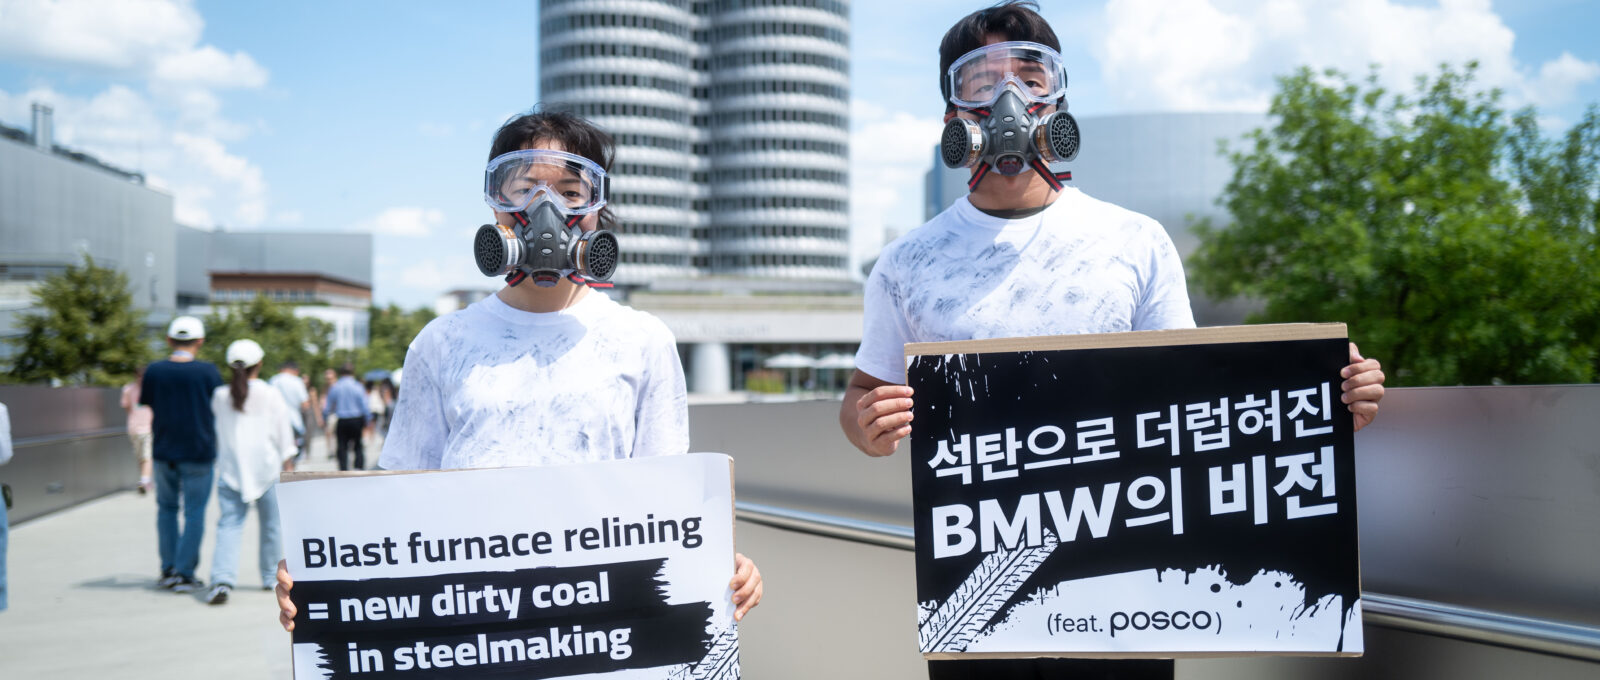 Activists stand in front of POSCO facility with signs urging POSCO to drop its plans to reline coal blast furnaces